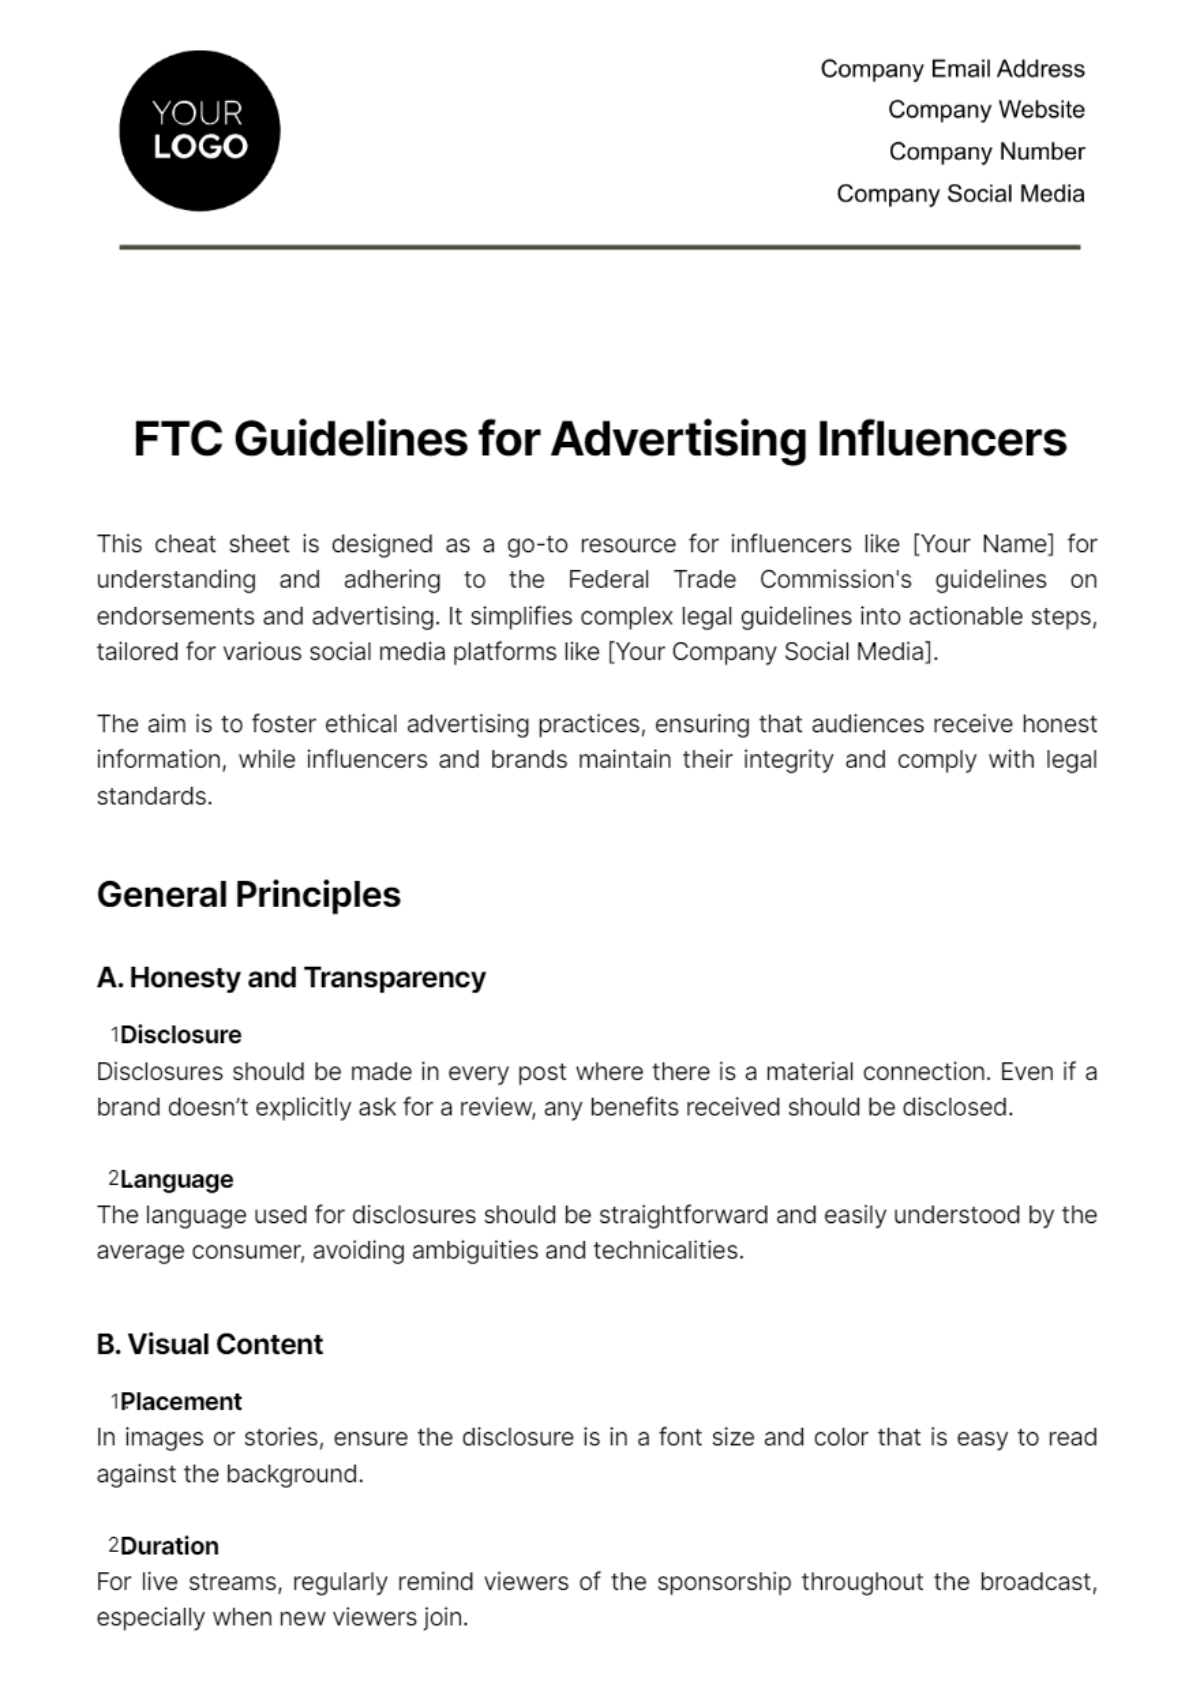 FTC Guidelines for Advertising Influencers Template